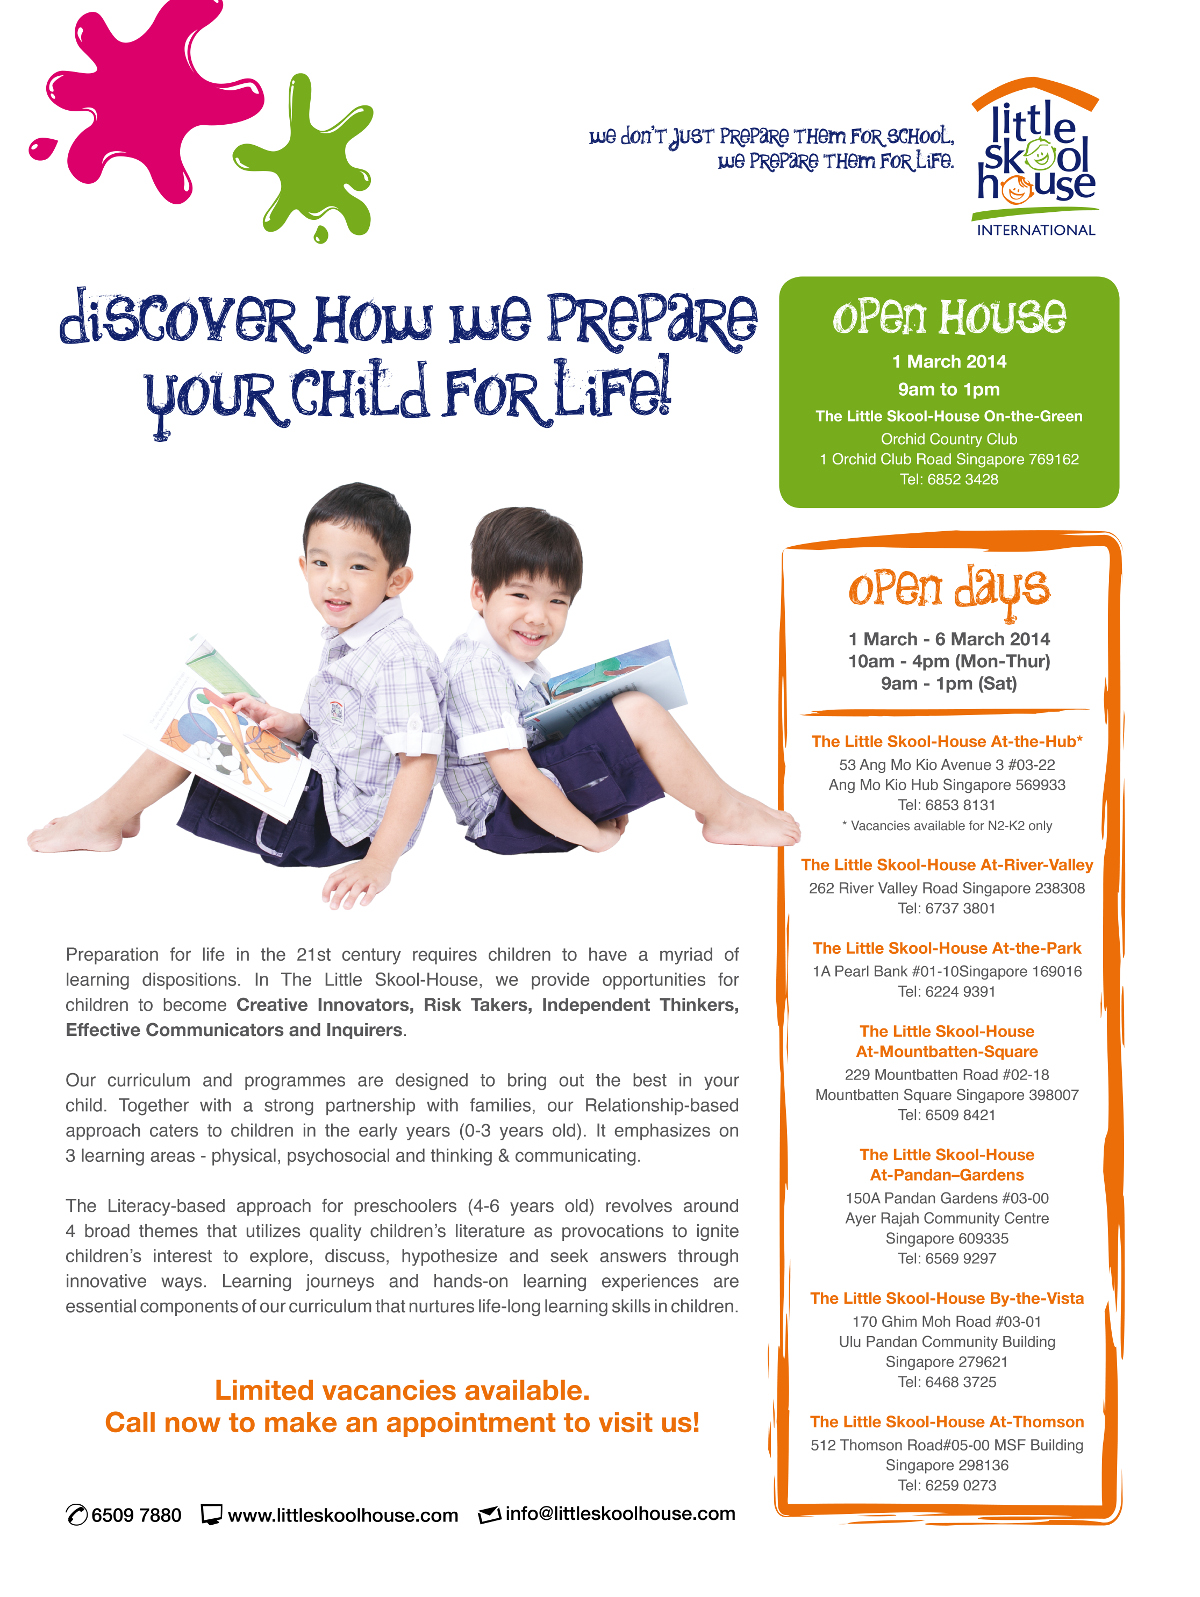 Discover how we prepare your child for life with The Little Skool-House At-Semb-Place, At-River-Valley and At-Thomson. Visit us today and learn how we prepare your child for life! Open Day 23 to 27 Sept 2013 10am to 11:30am and 3:30pm to 5pm. Register now to receive a premium golf umbrella! Terms and conditions apply. Call now to make an appointment to visit us! Website: www.littleskoolhouse.com | Email: info@littleskoolhouse.com. At-Semb-Place 6752 1170, At-River-Valley 6737 3801 and At-Thomson 6259 0273.